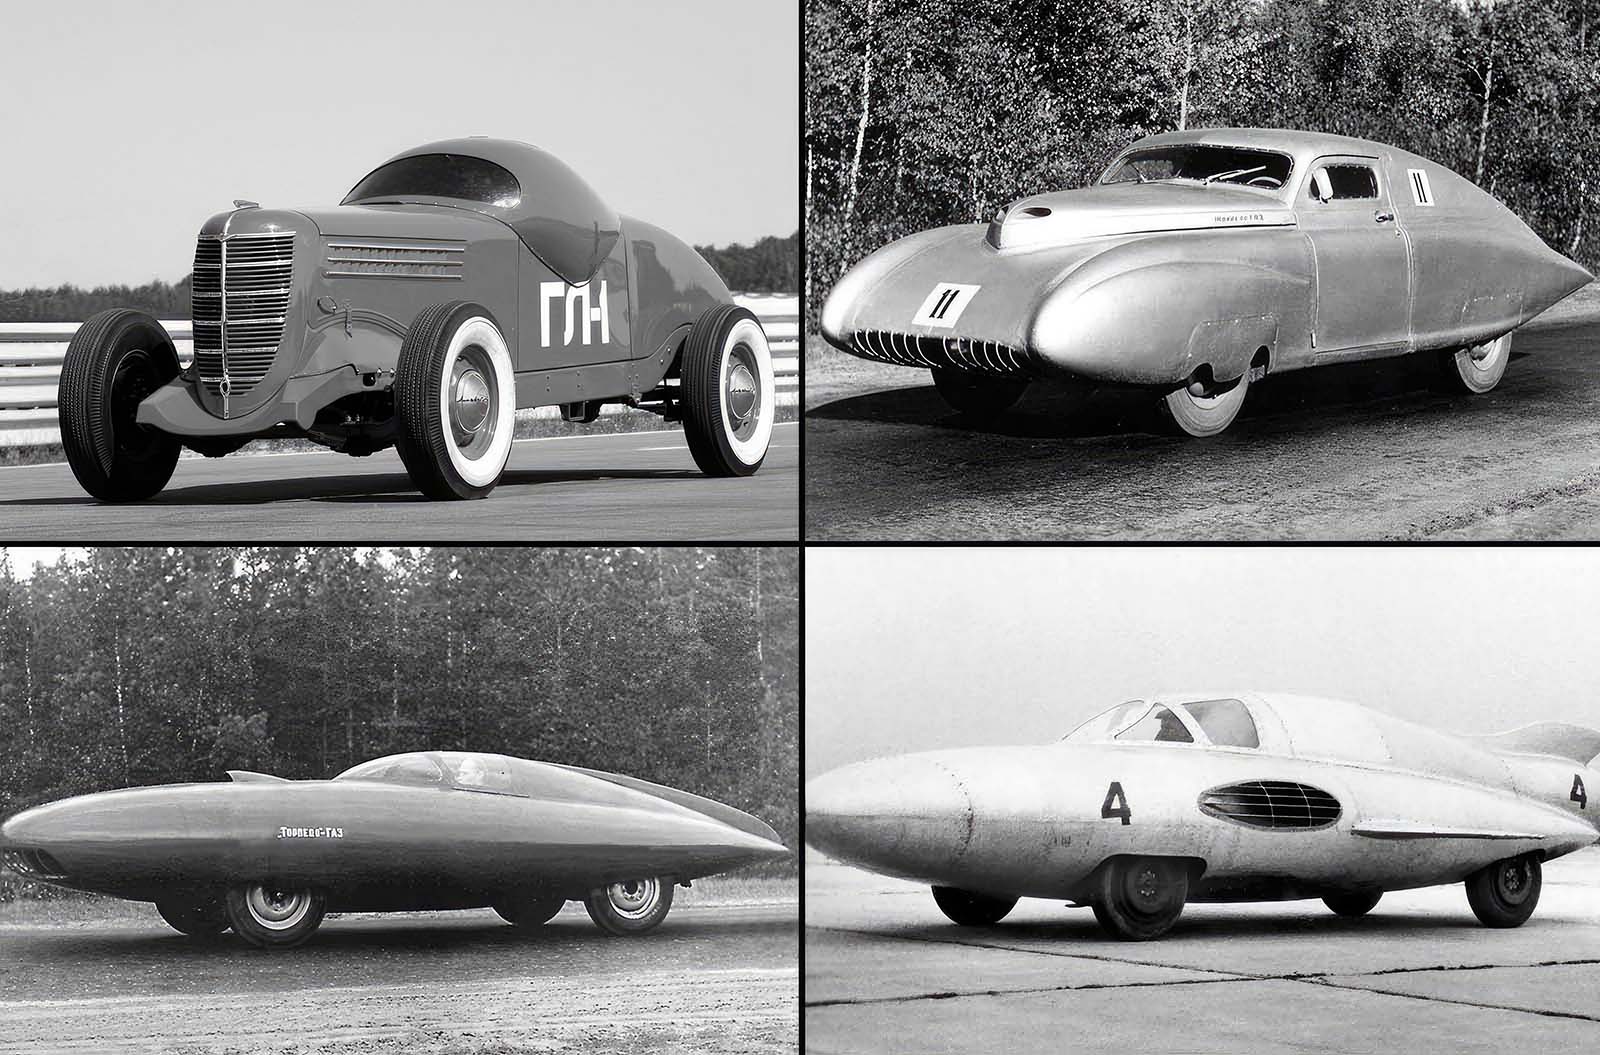 Soviet Style and Speed: Unconventional Racing and Concept Cars from the Soviet Union